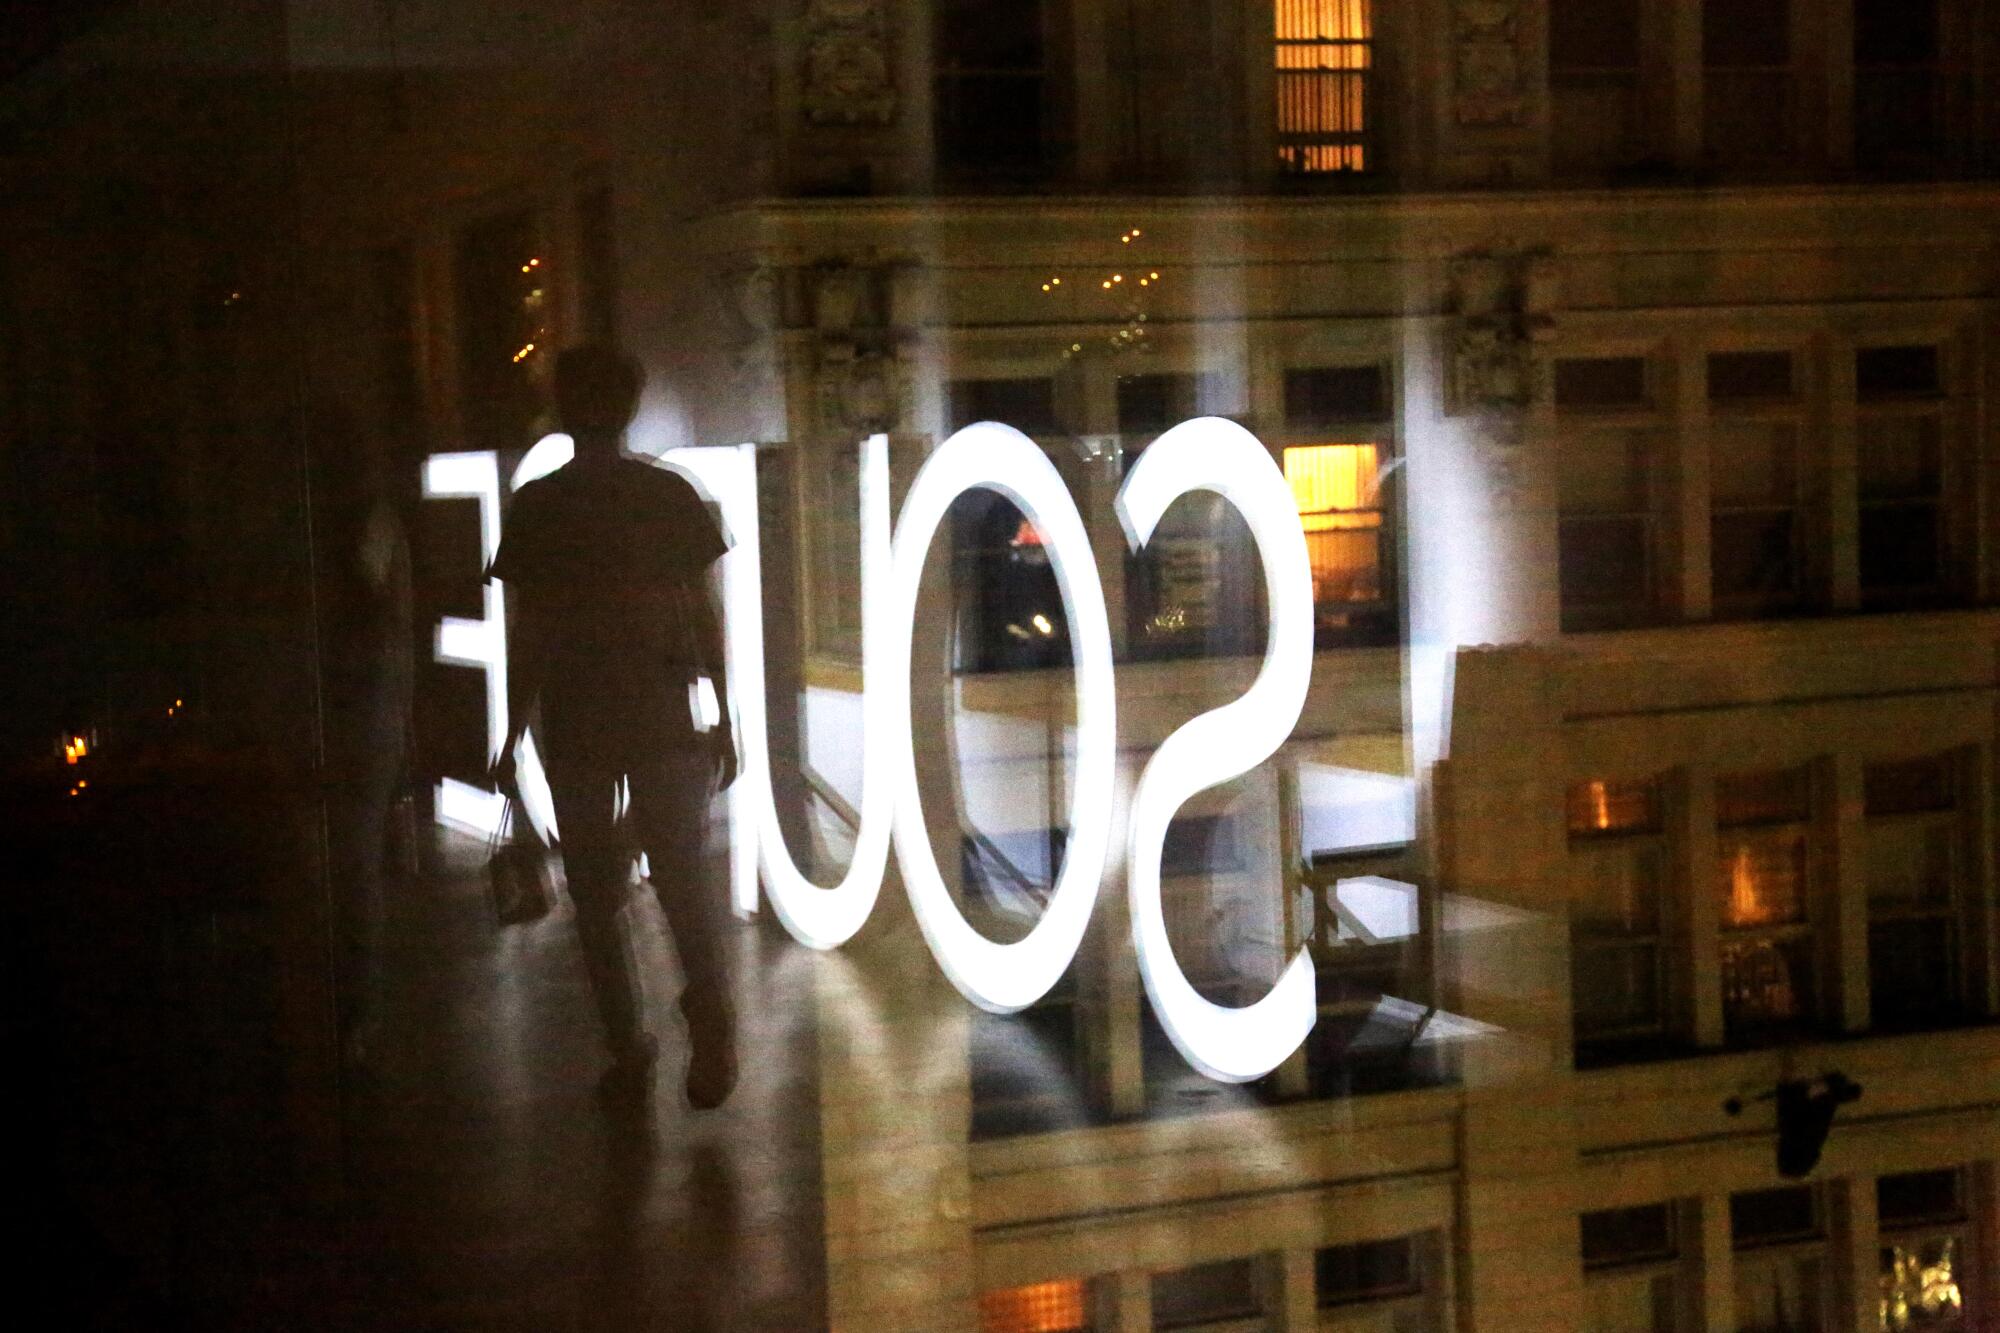 The silhouette of a person  in a dark room against the reflection of the word Source in large, white letters